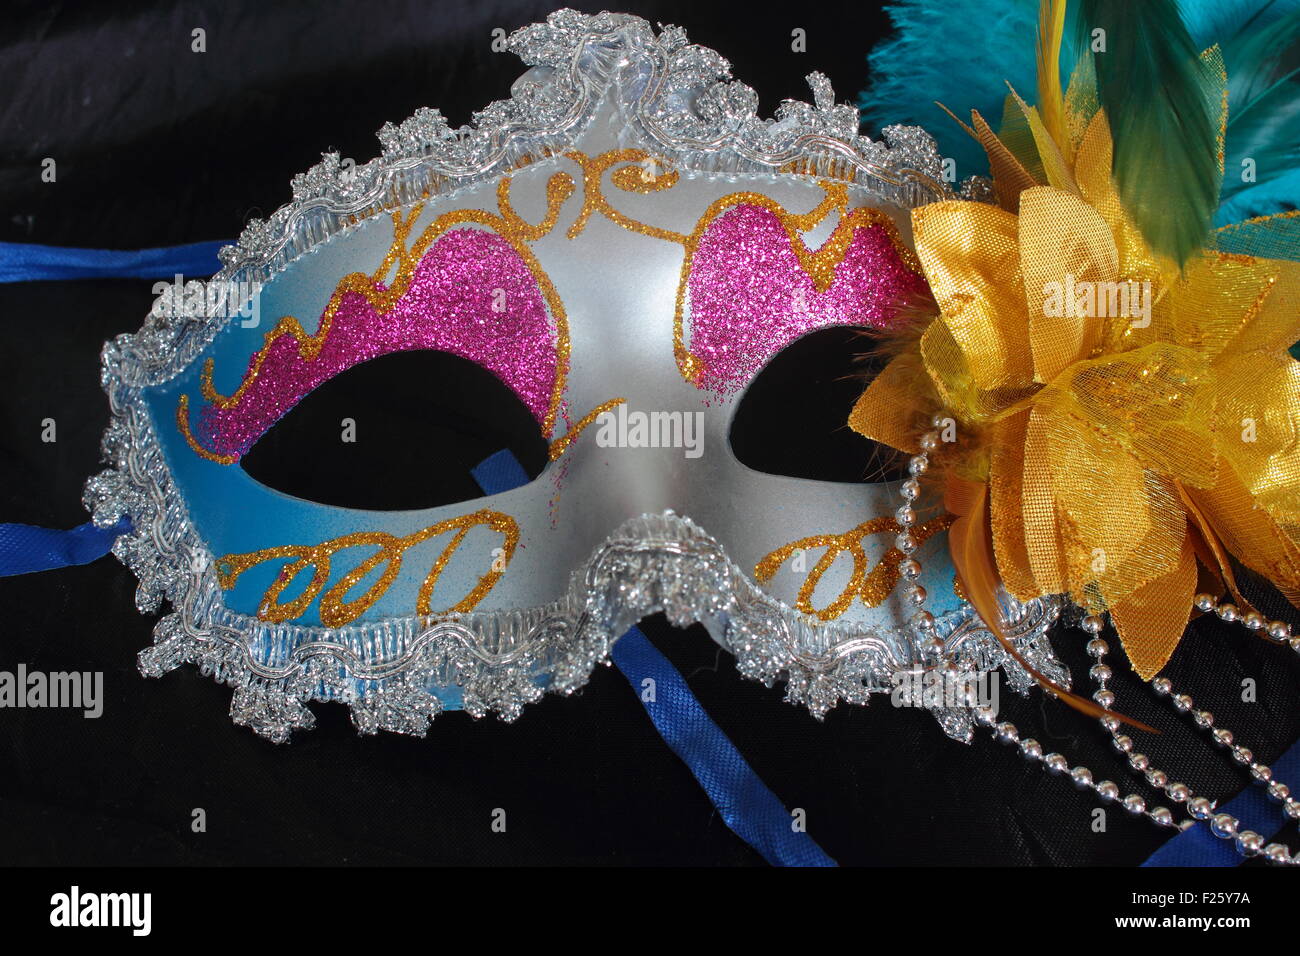 masquerade mask with different decorations Stock Photo